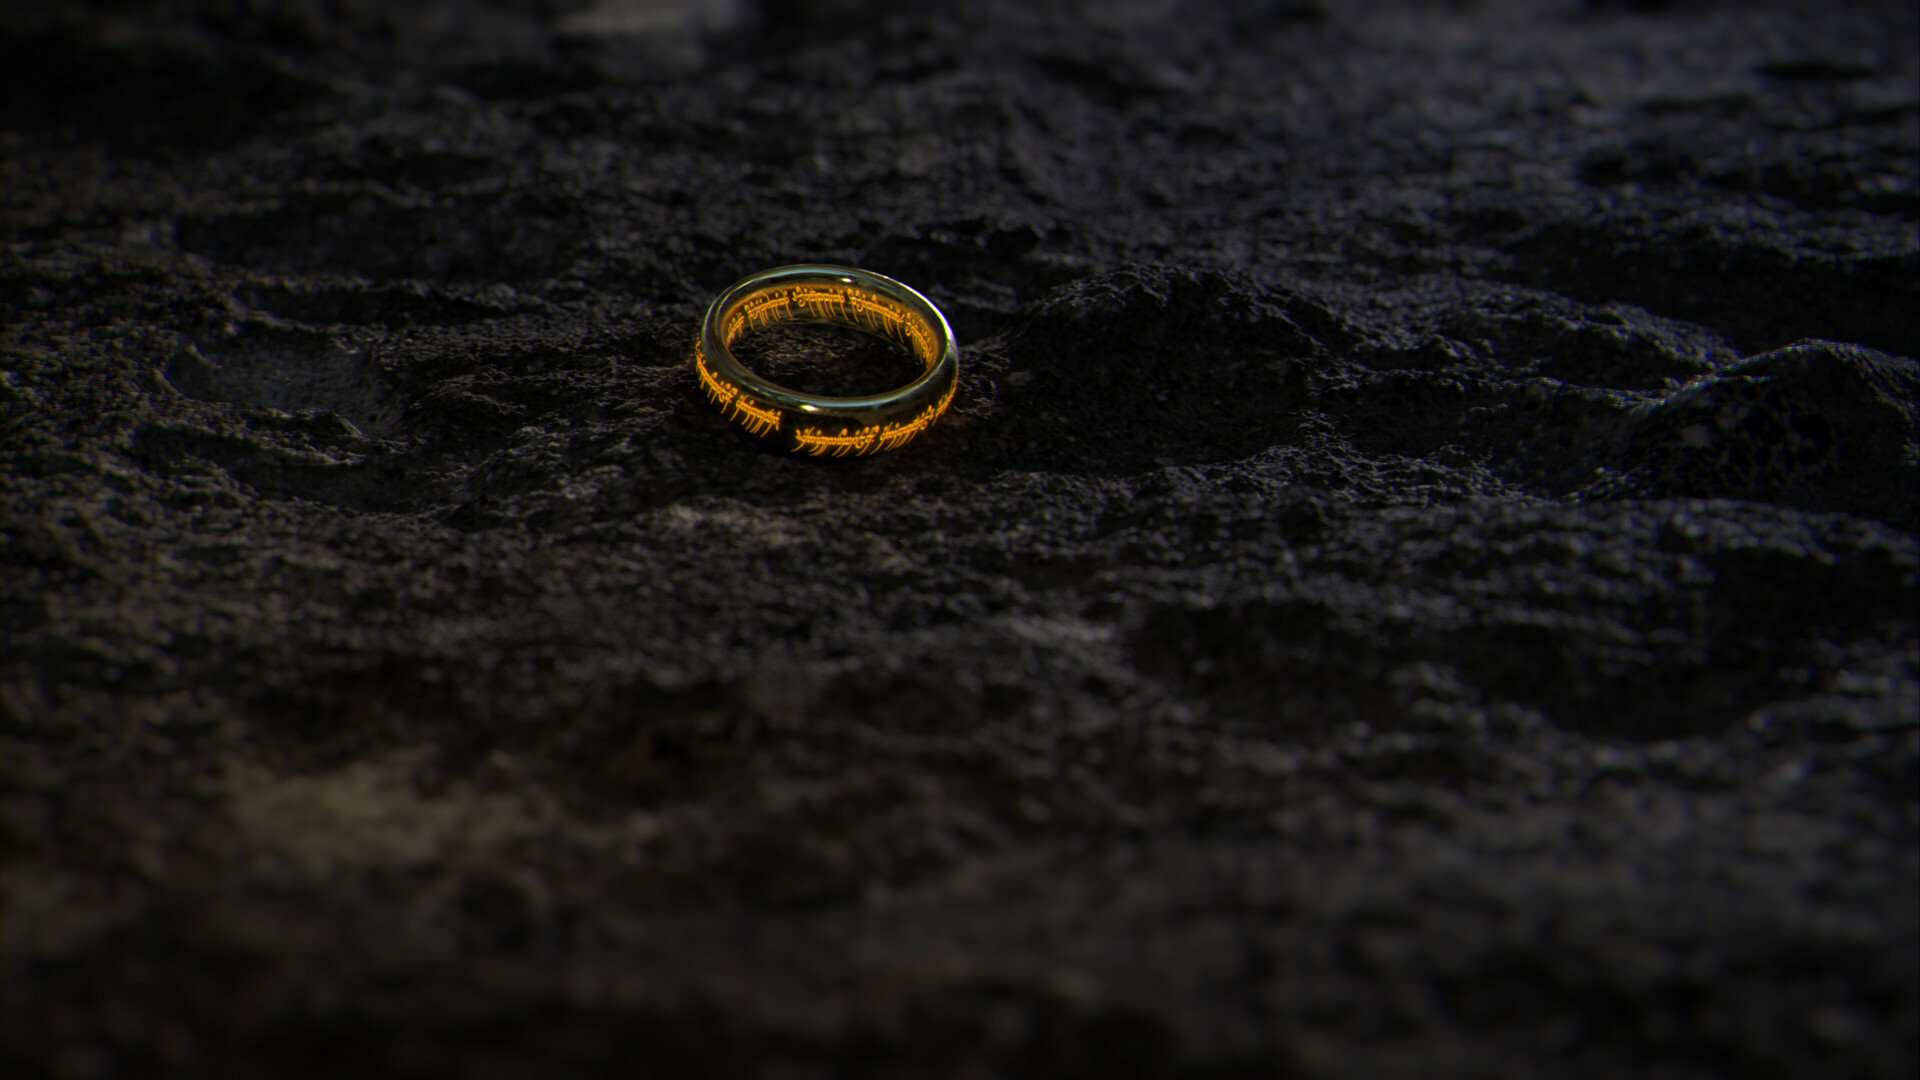 The Lord of the Rings: The One Ring, An ancient artifact created by the Dark Lord Sauron. 1920x1080 Full HD Background.